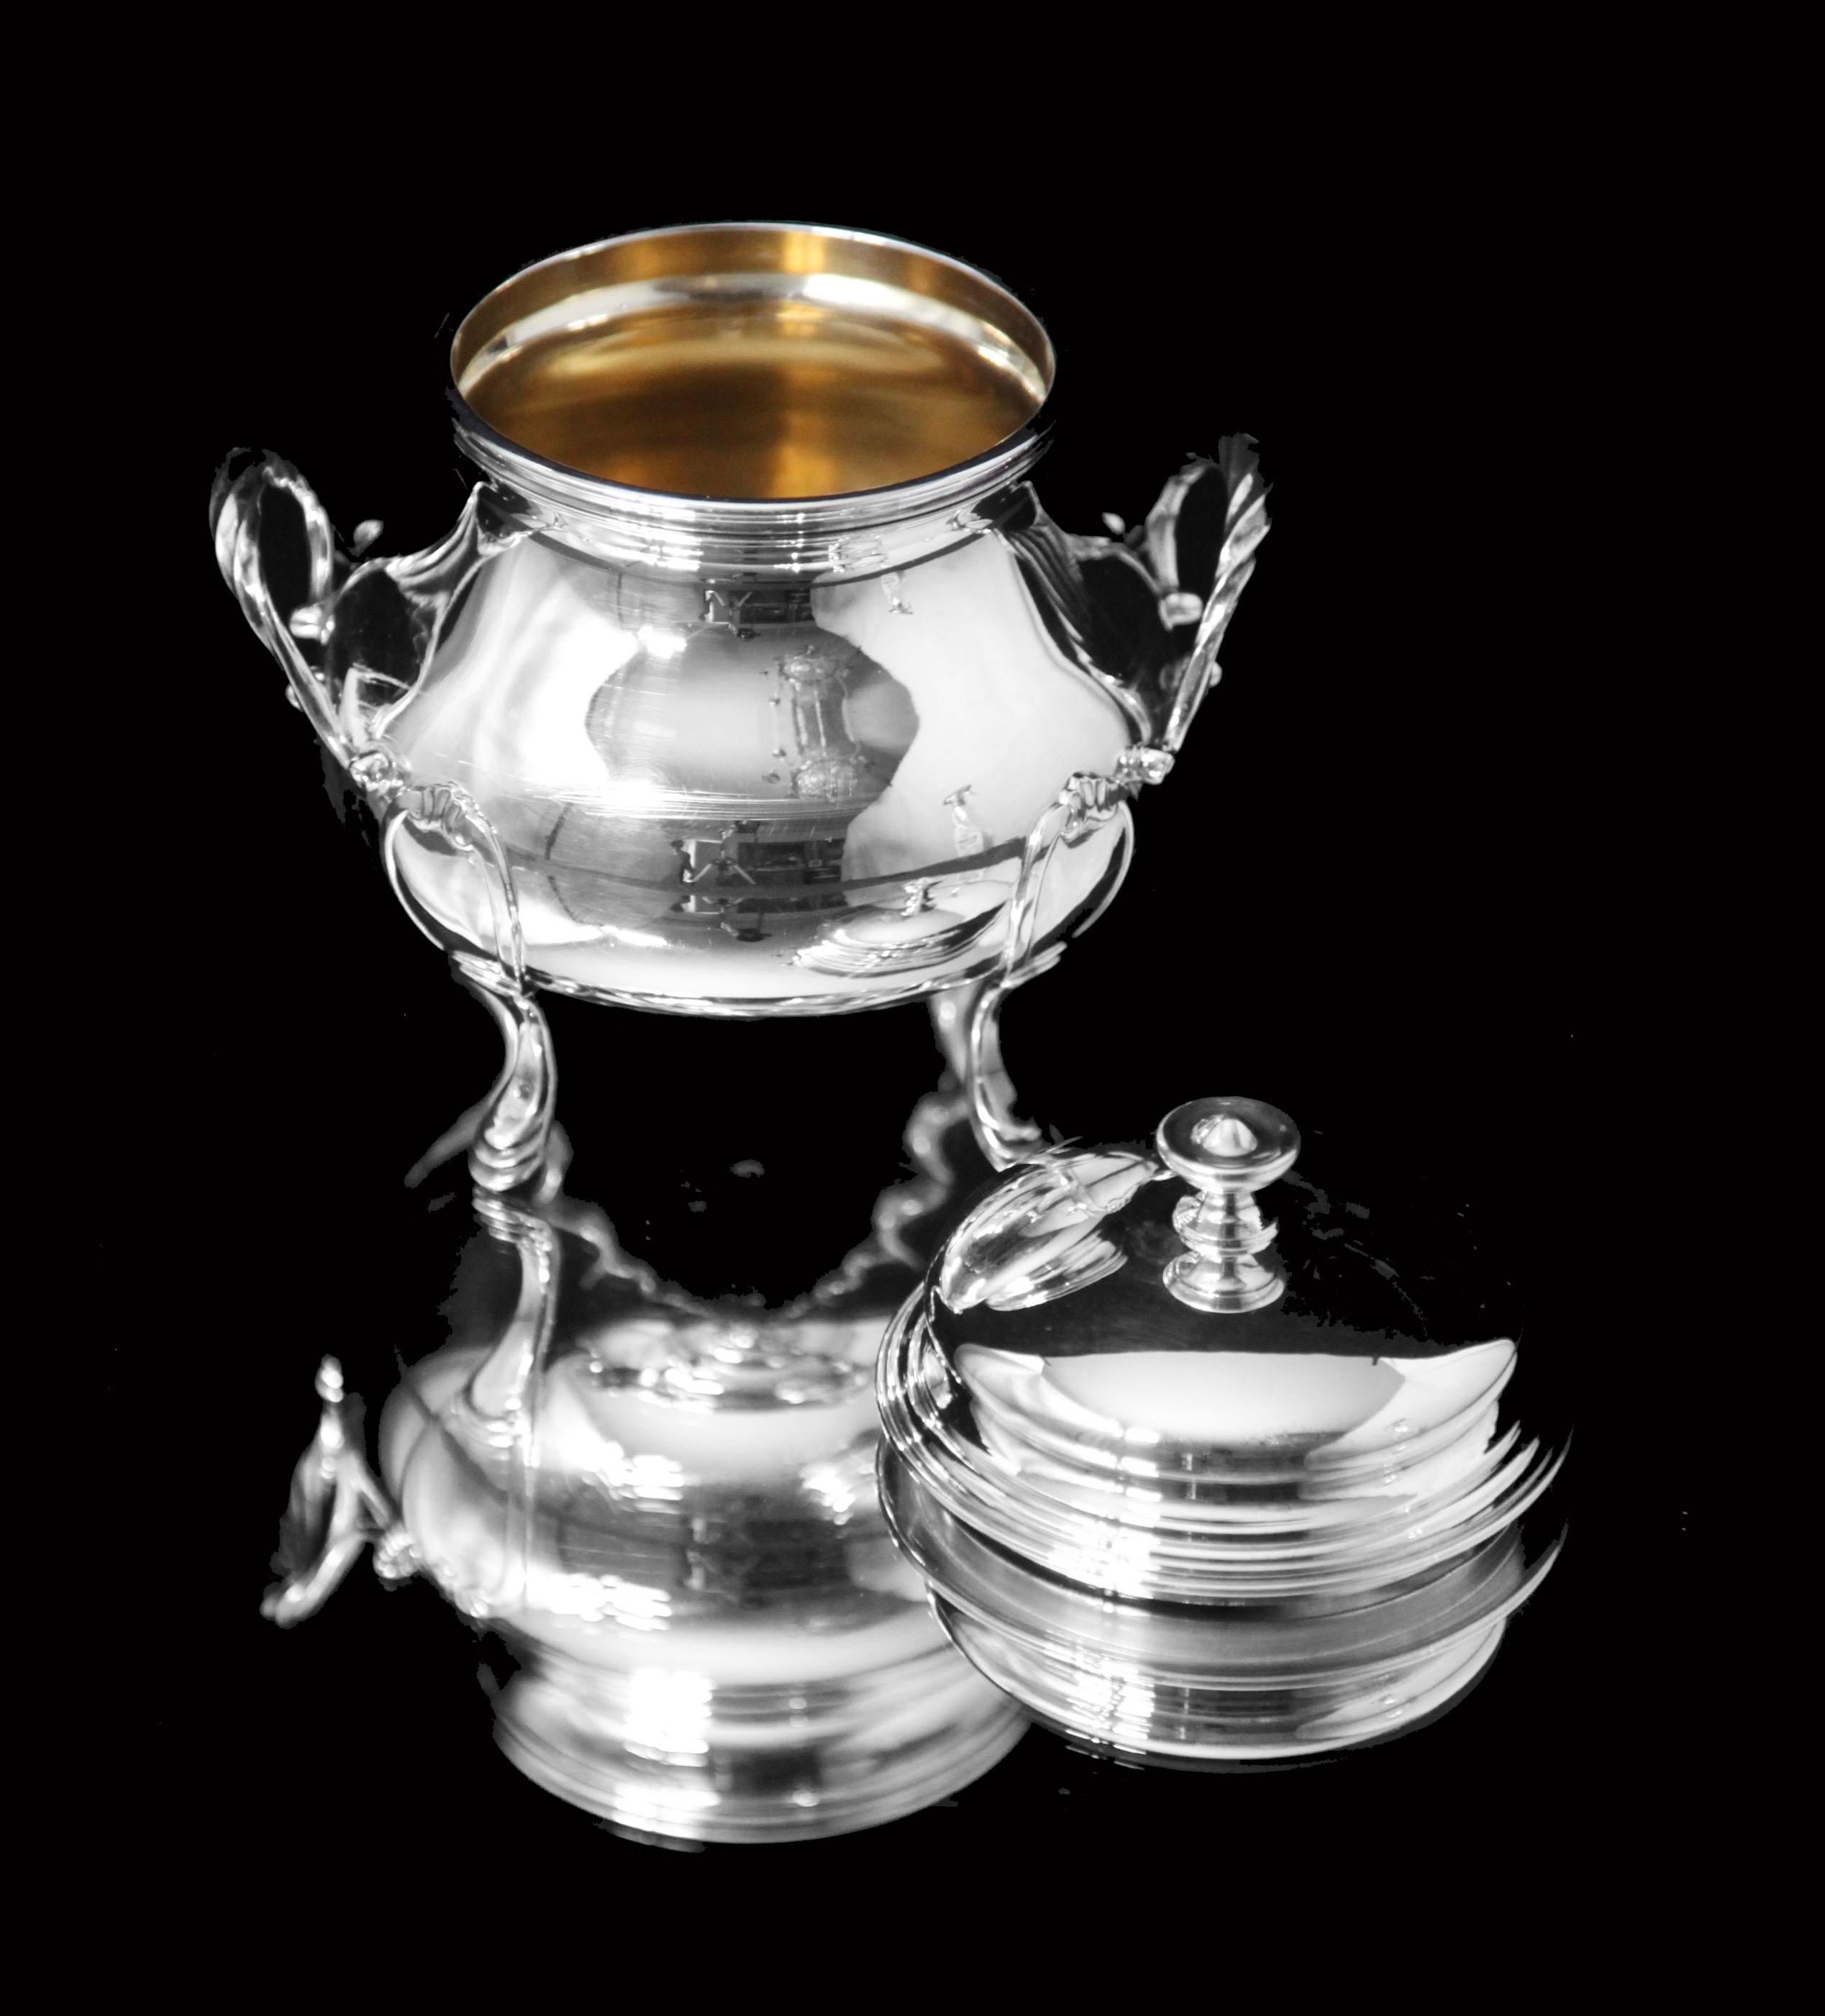 Odiot Henin - 5pc. Antique French 950 Sterling Silver Louis XVI Tea Set + Tray For Sale 4